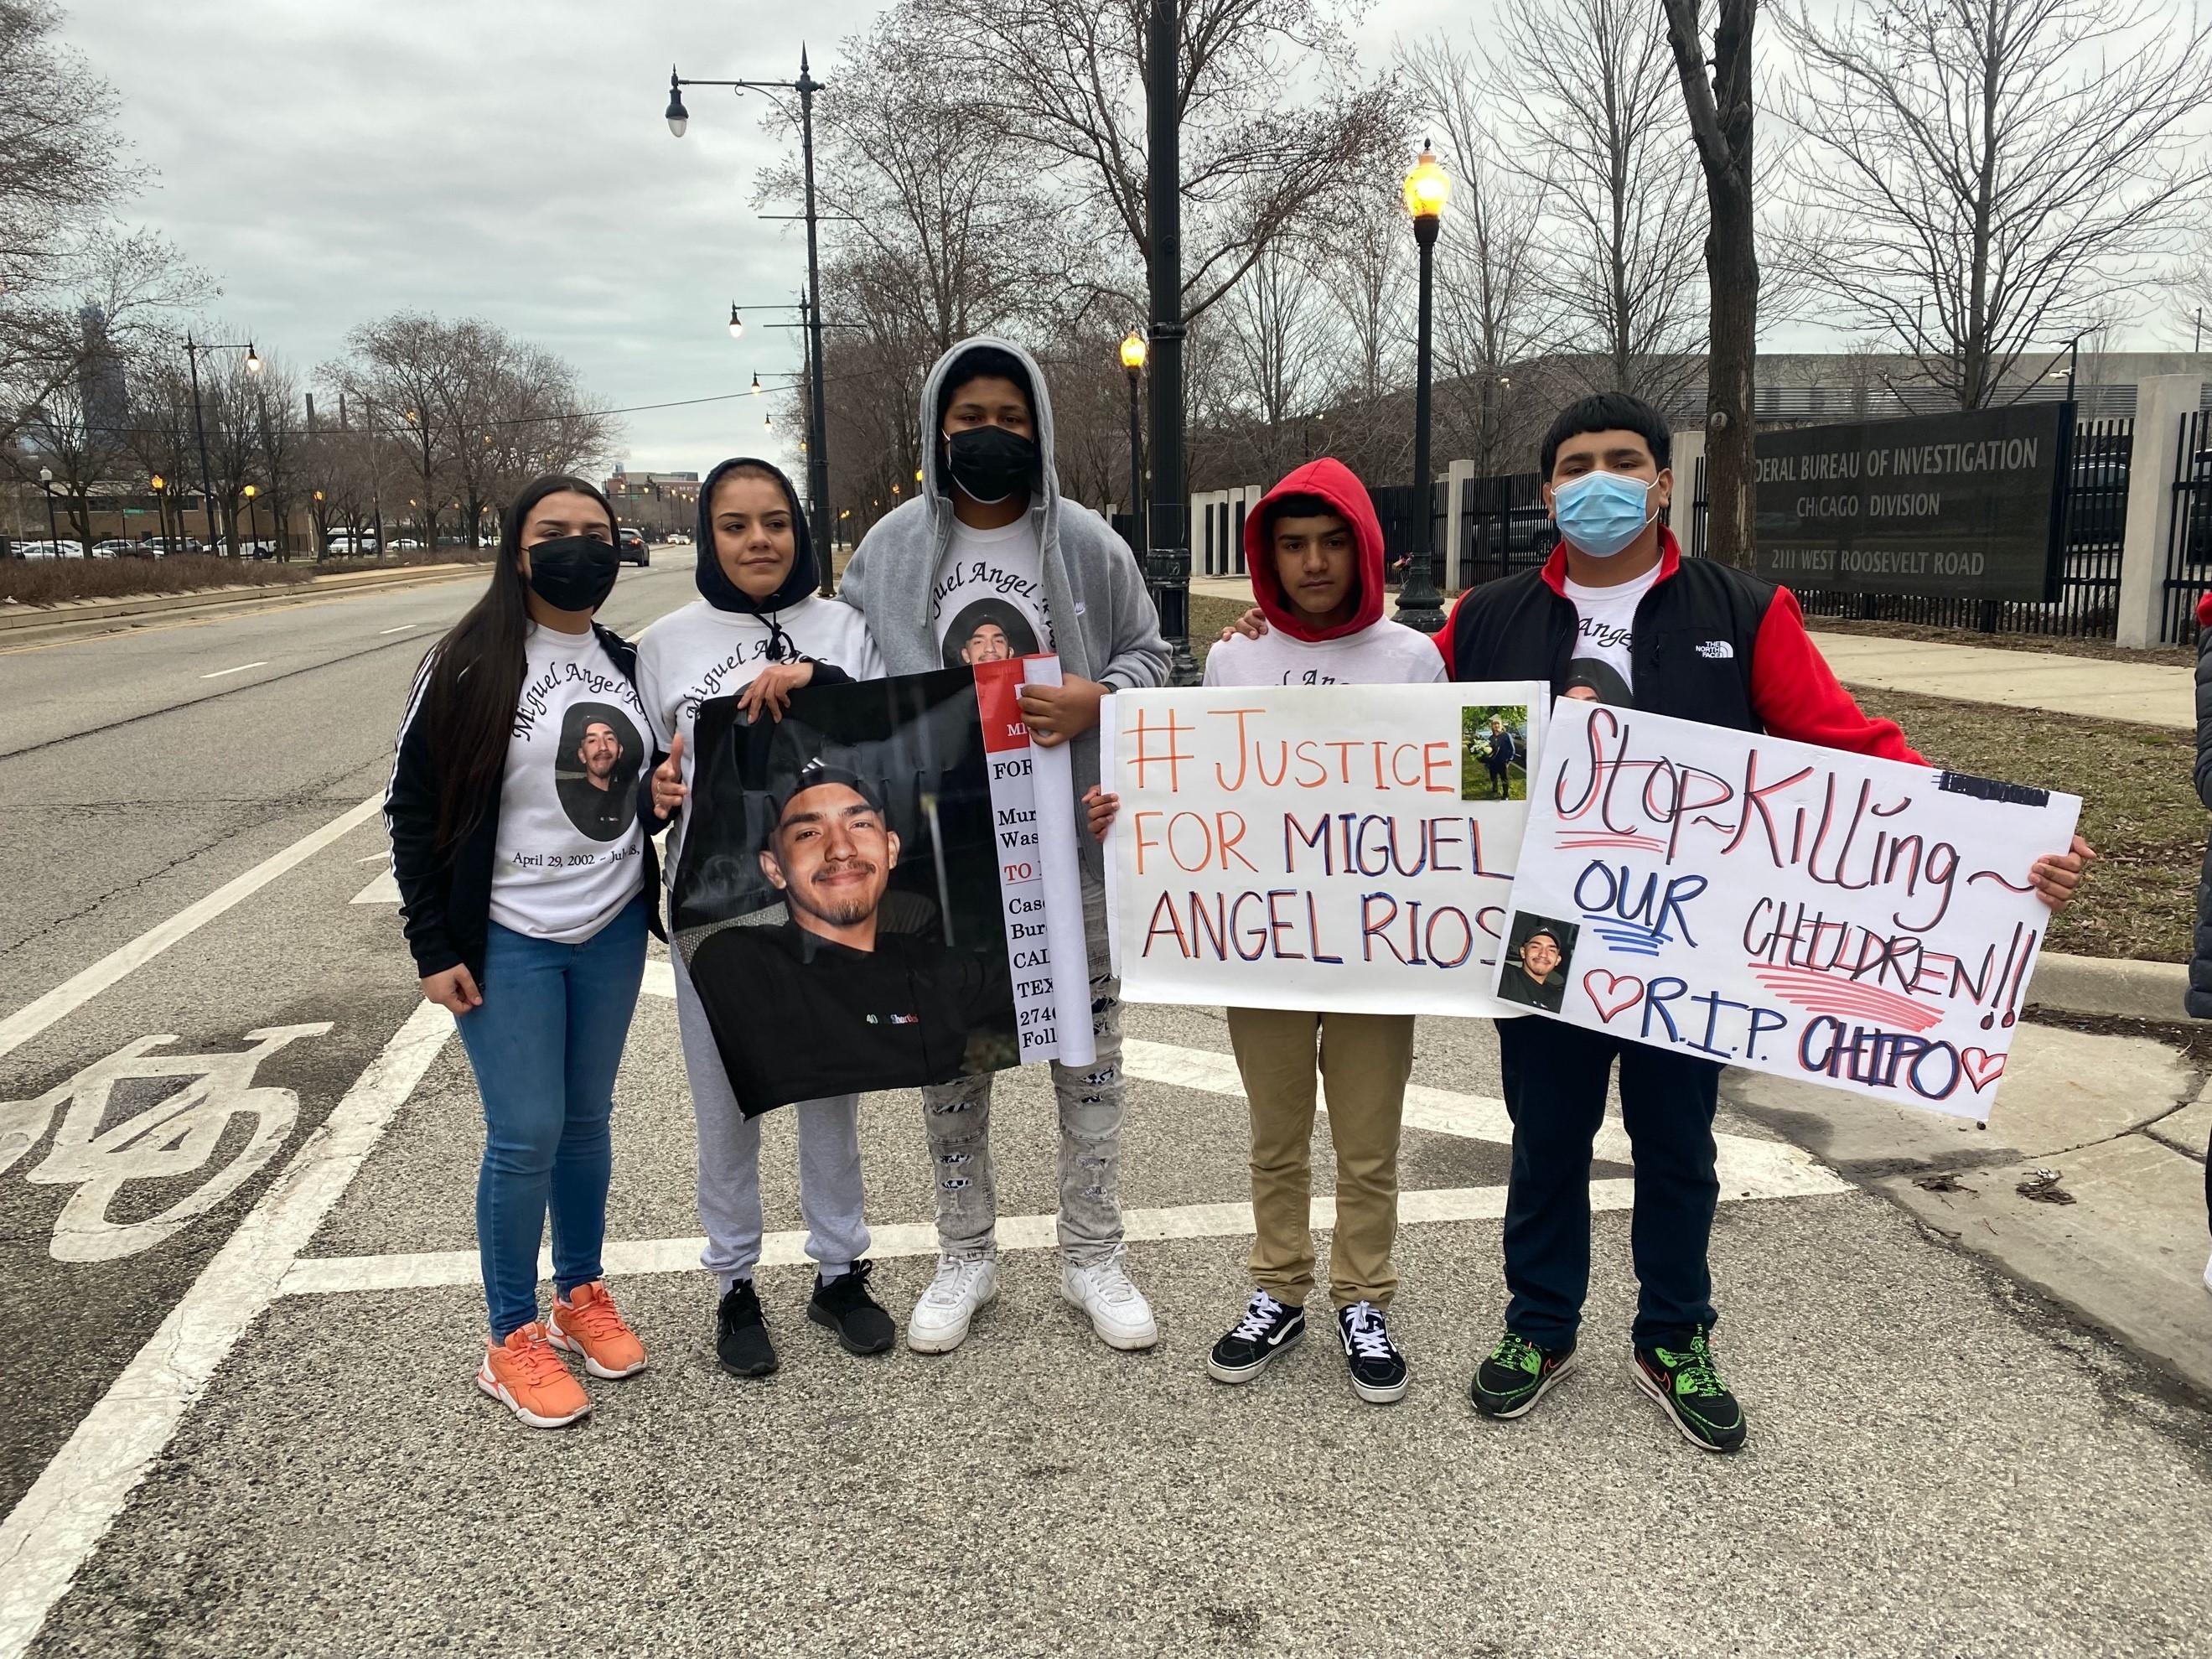 The siblings of Miguel Angel Rios, whose killing remains unsolved, gathered at the FBI Chicago field office on March 22, 2022. (Joanna Hernandez / WTTW News)